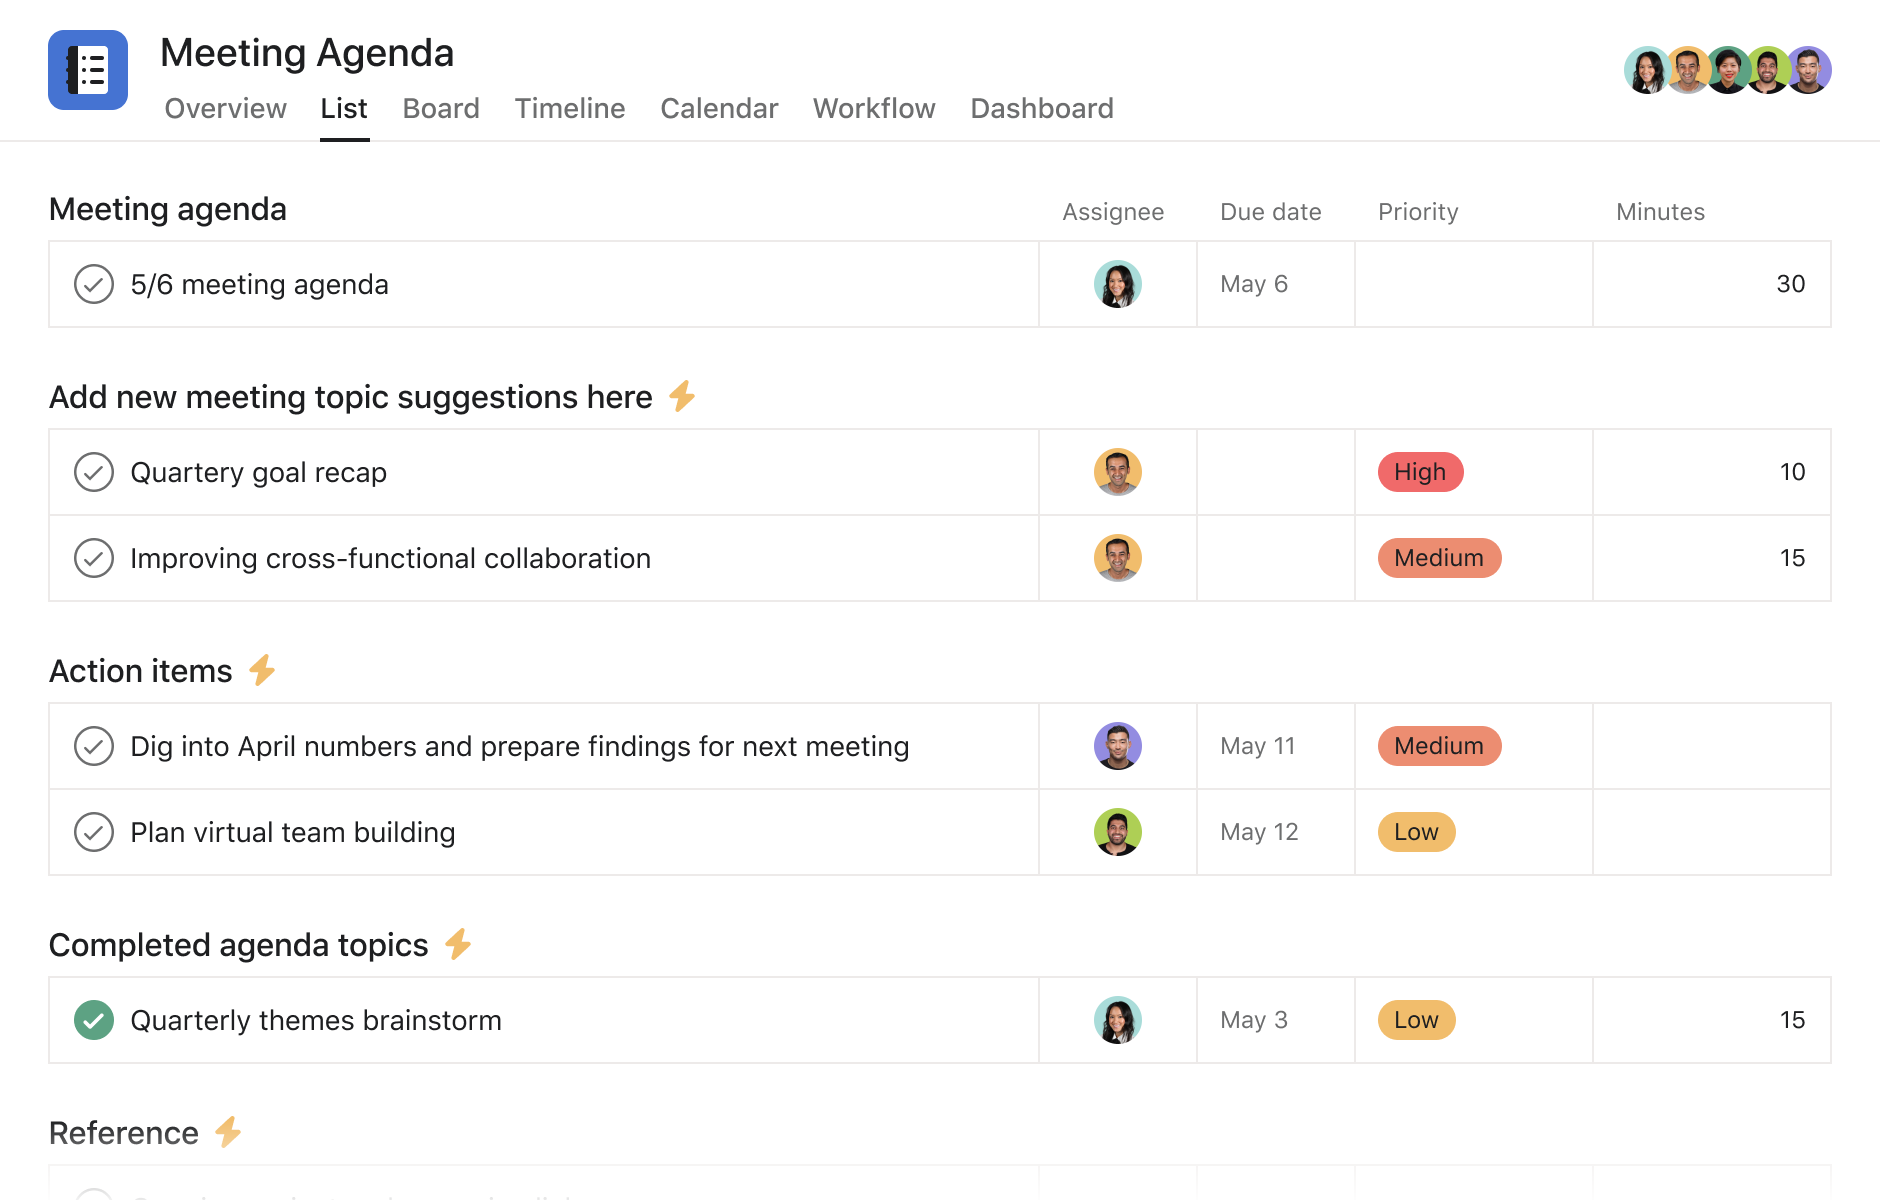 [Product UI] Project Plan Templates - Board Meeting Agenda in Asana (Lists)